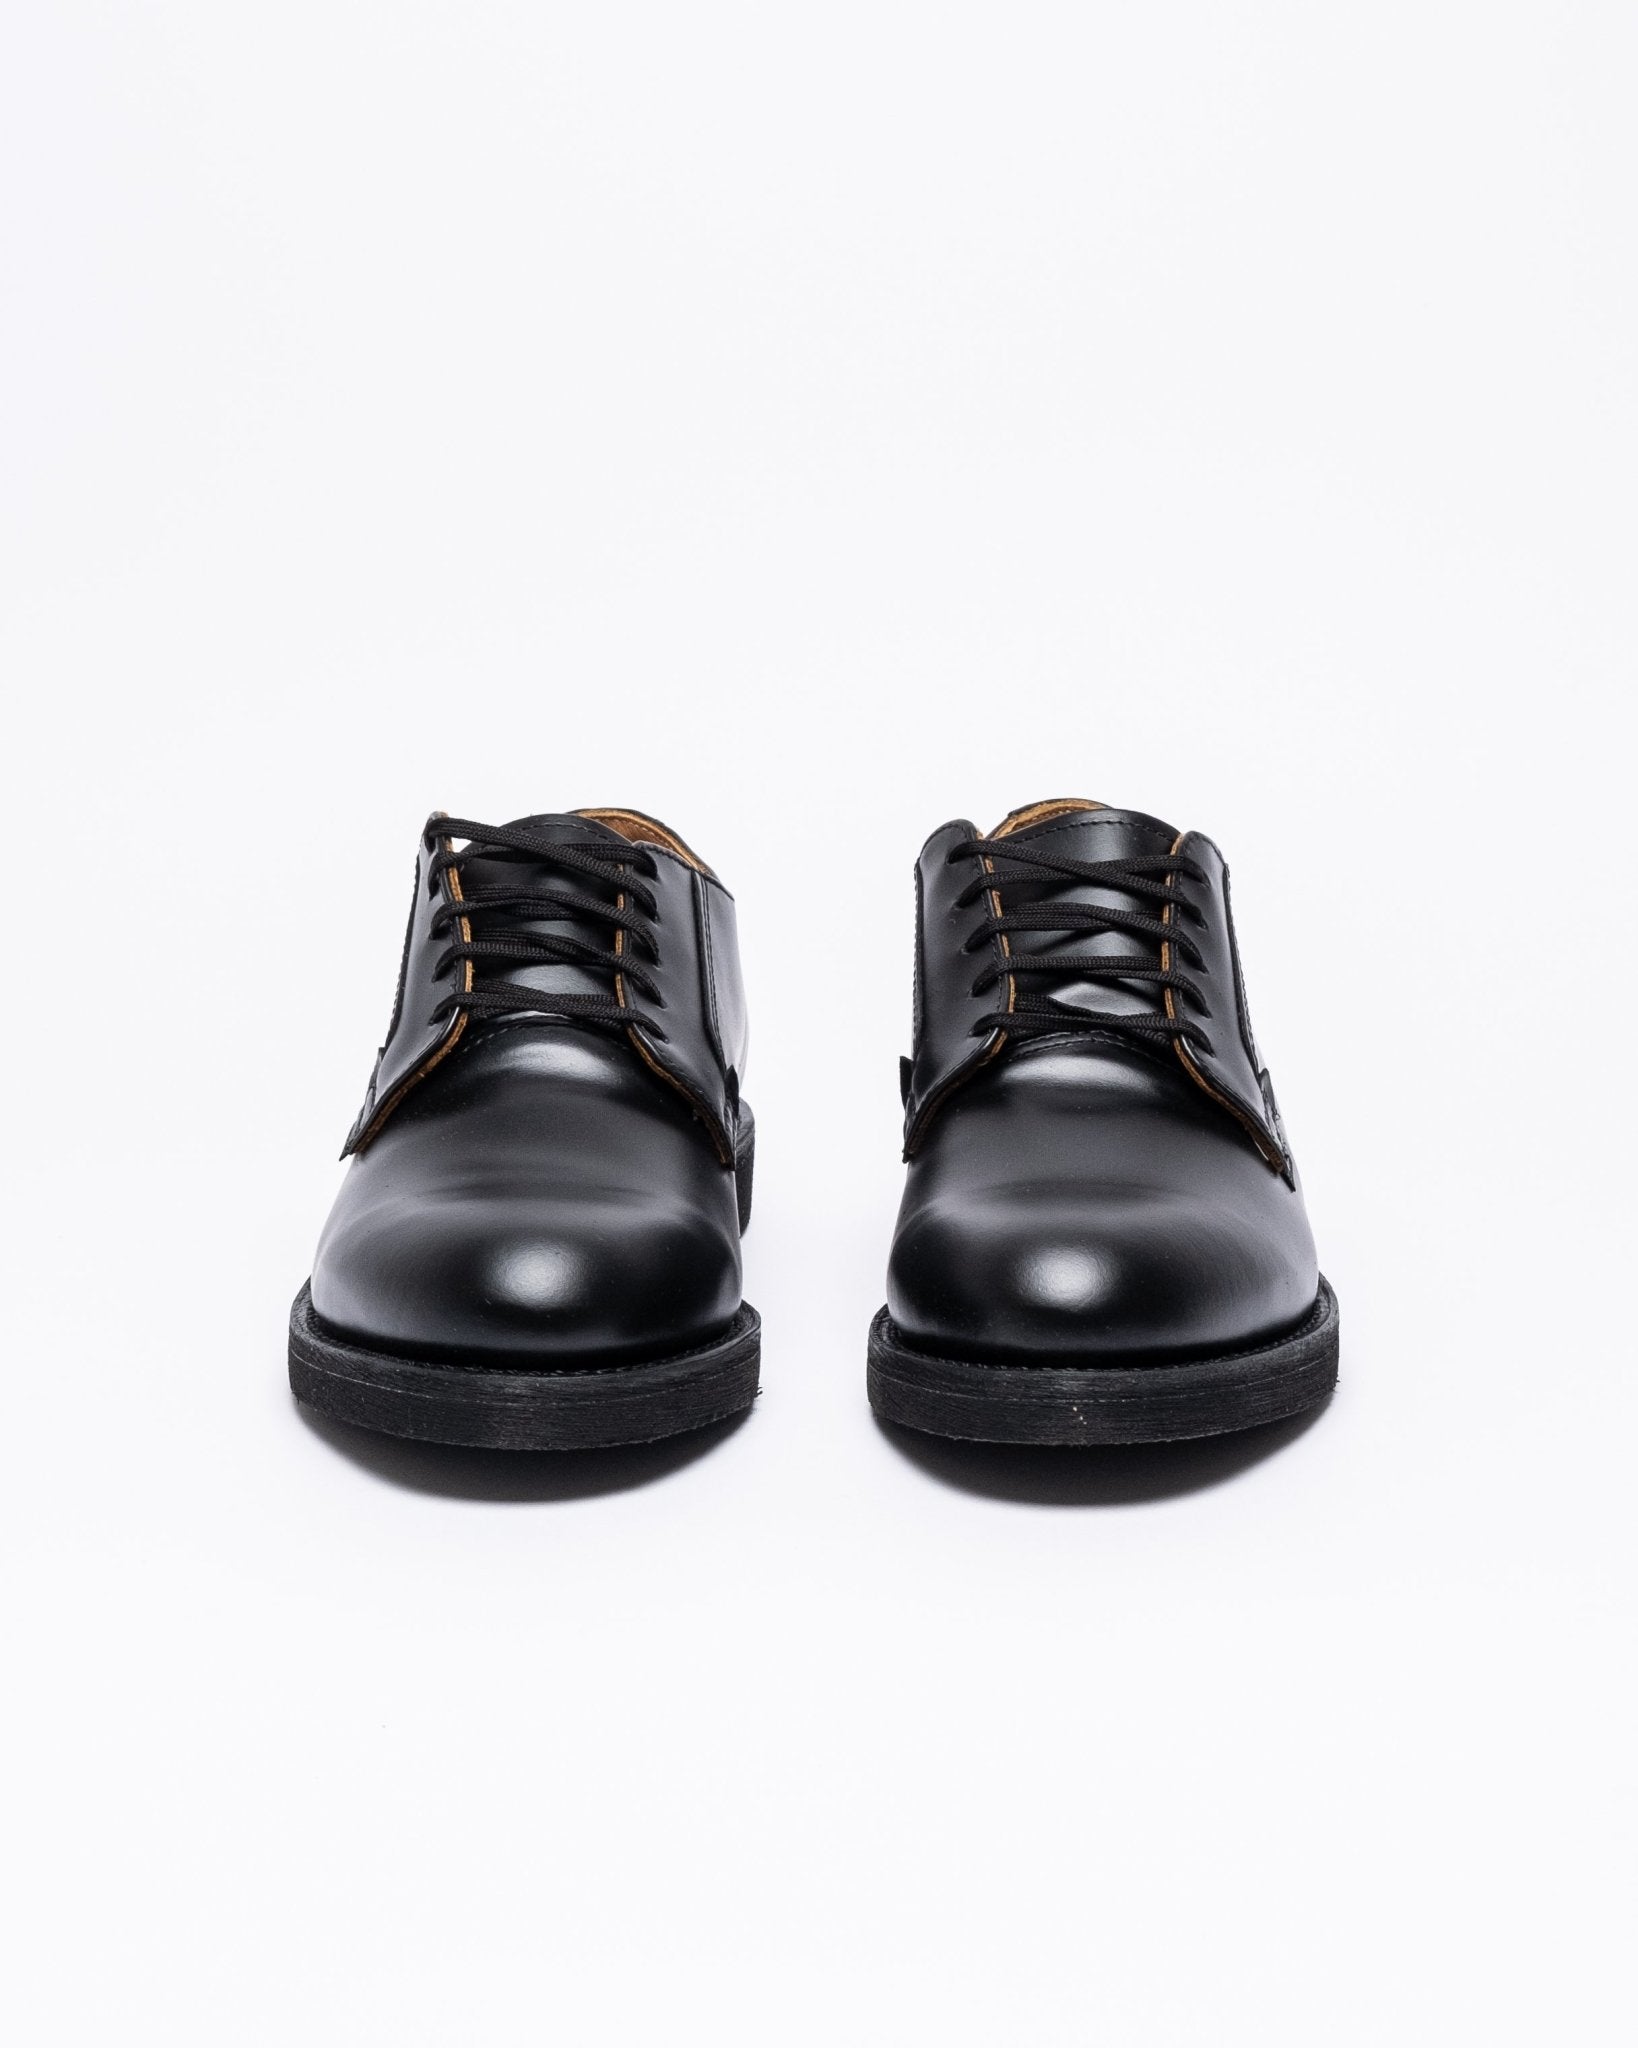 Postman Oxford 101 Black Chaparral Leather - Meadow of Malmö